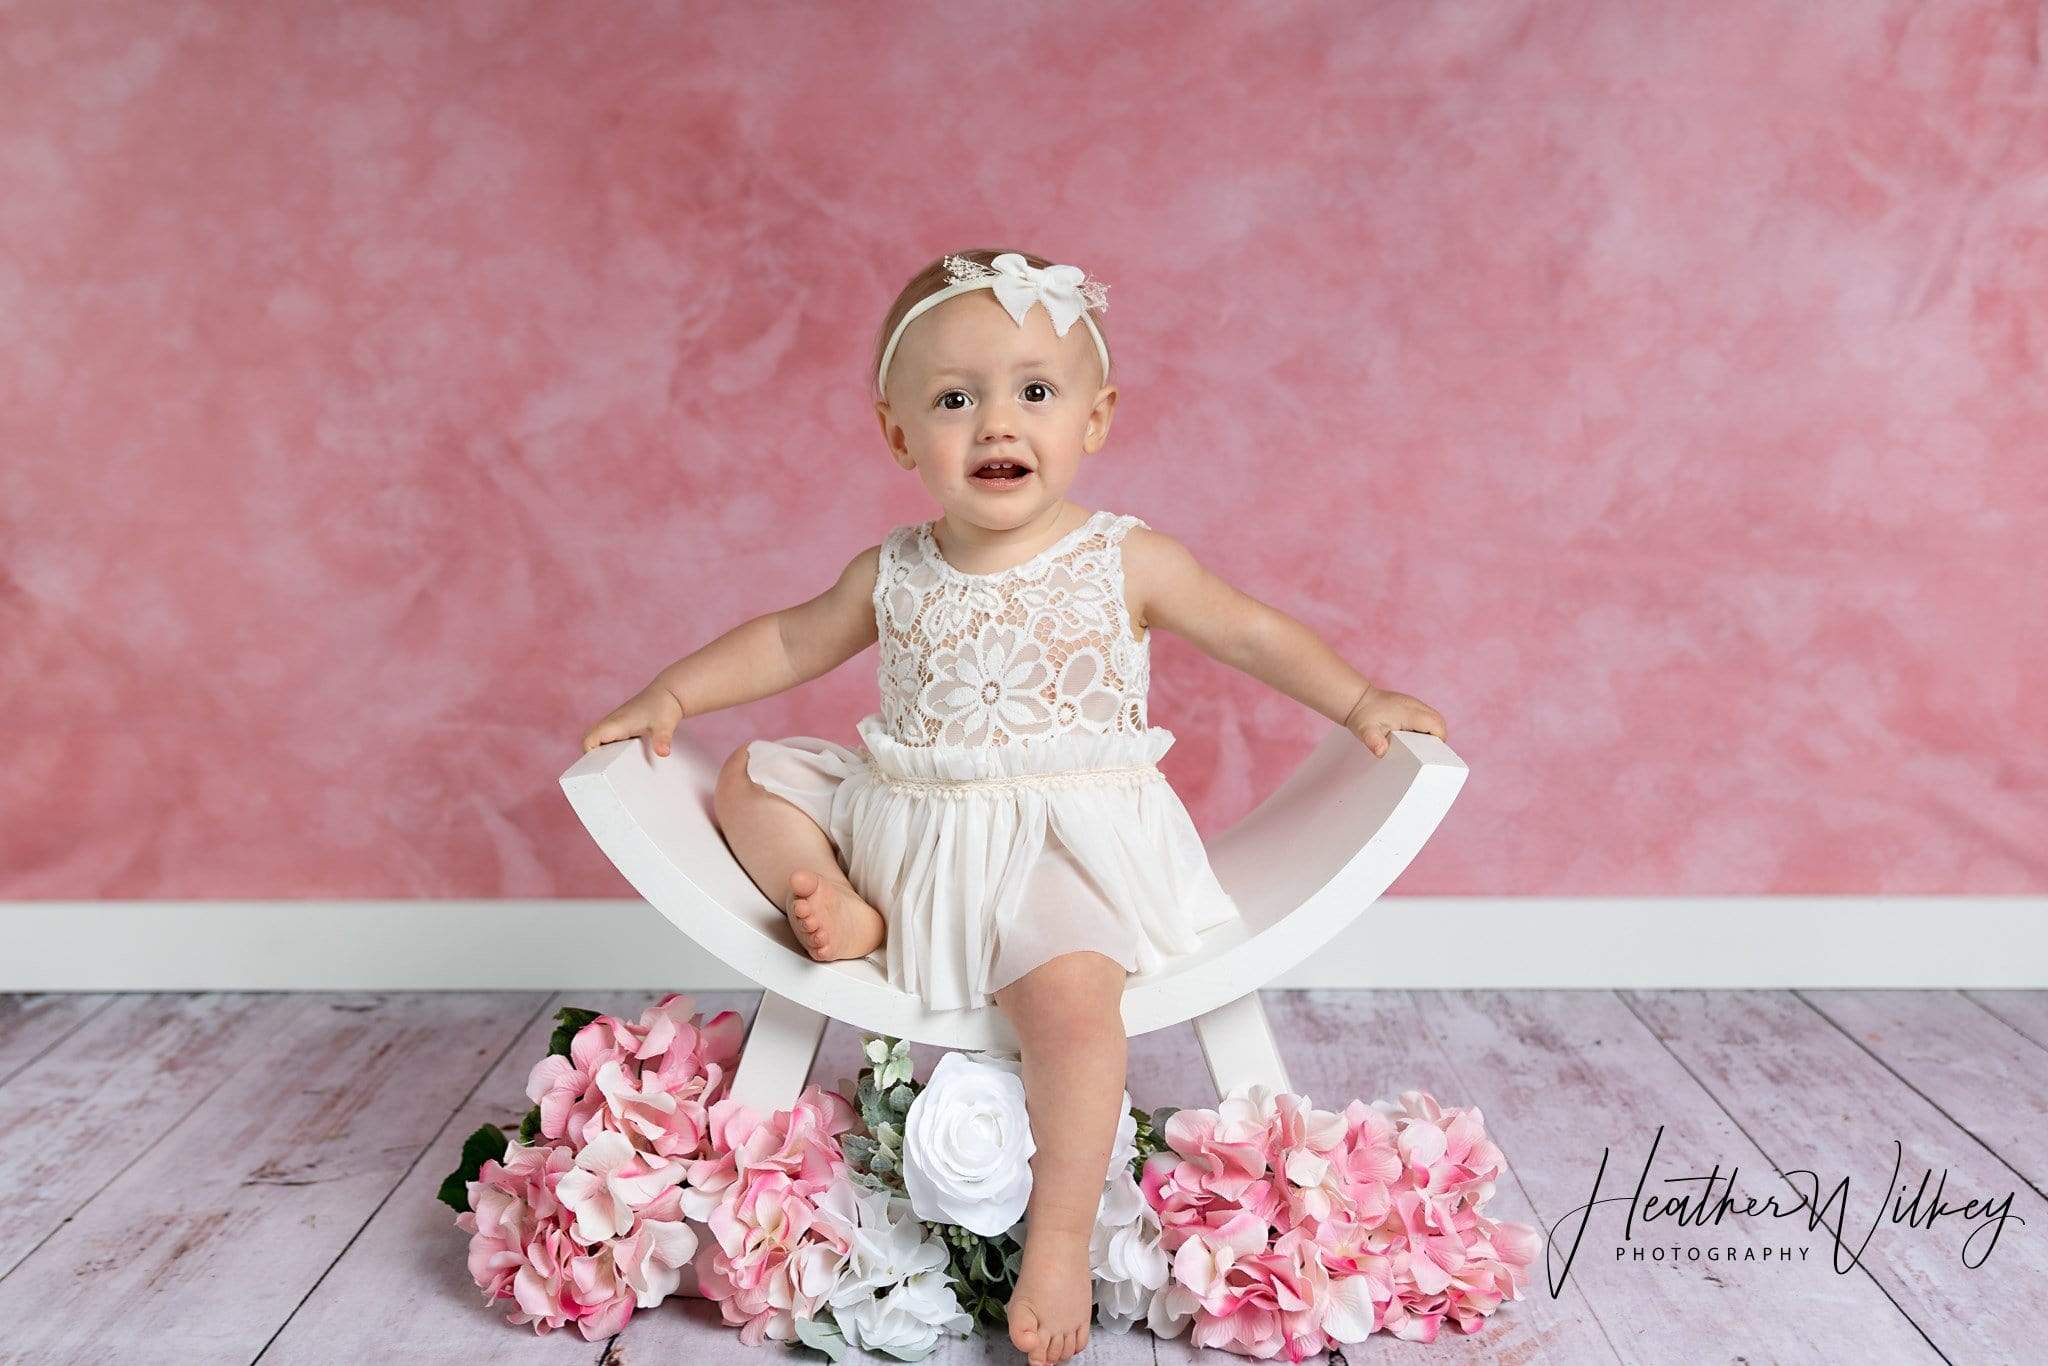 Kate Pink Rosy Blush Backdrop for Photography Designed by Modest Brushes